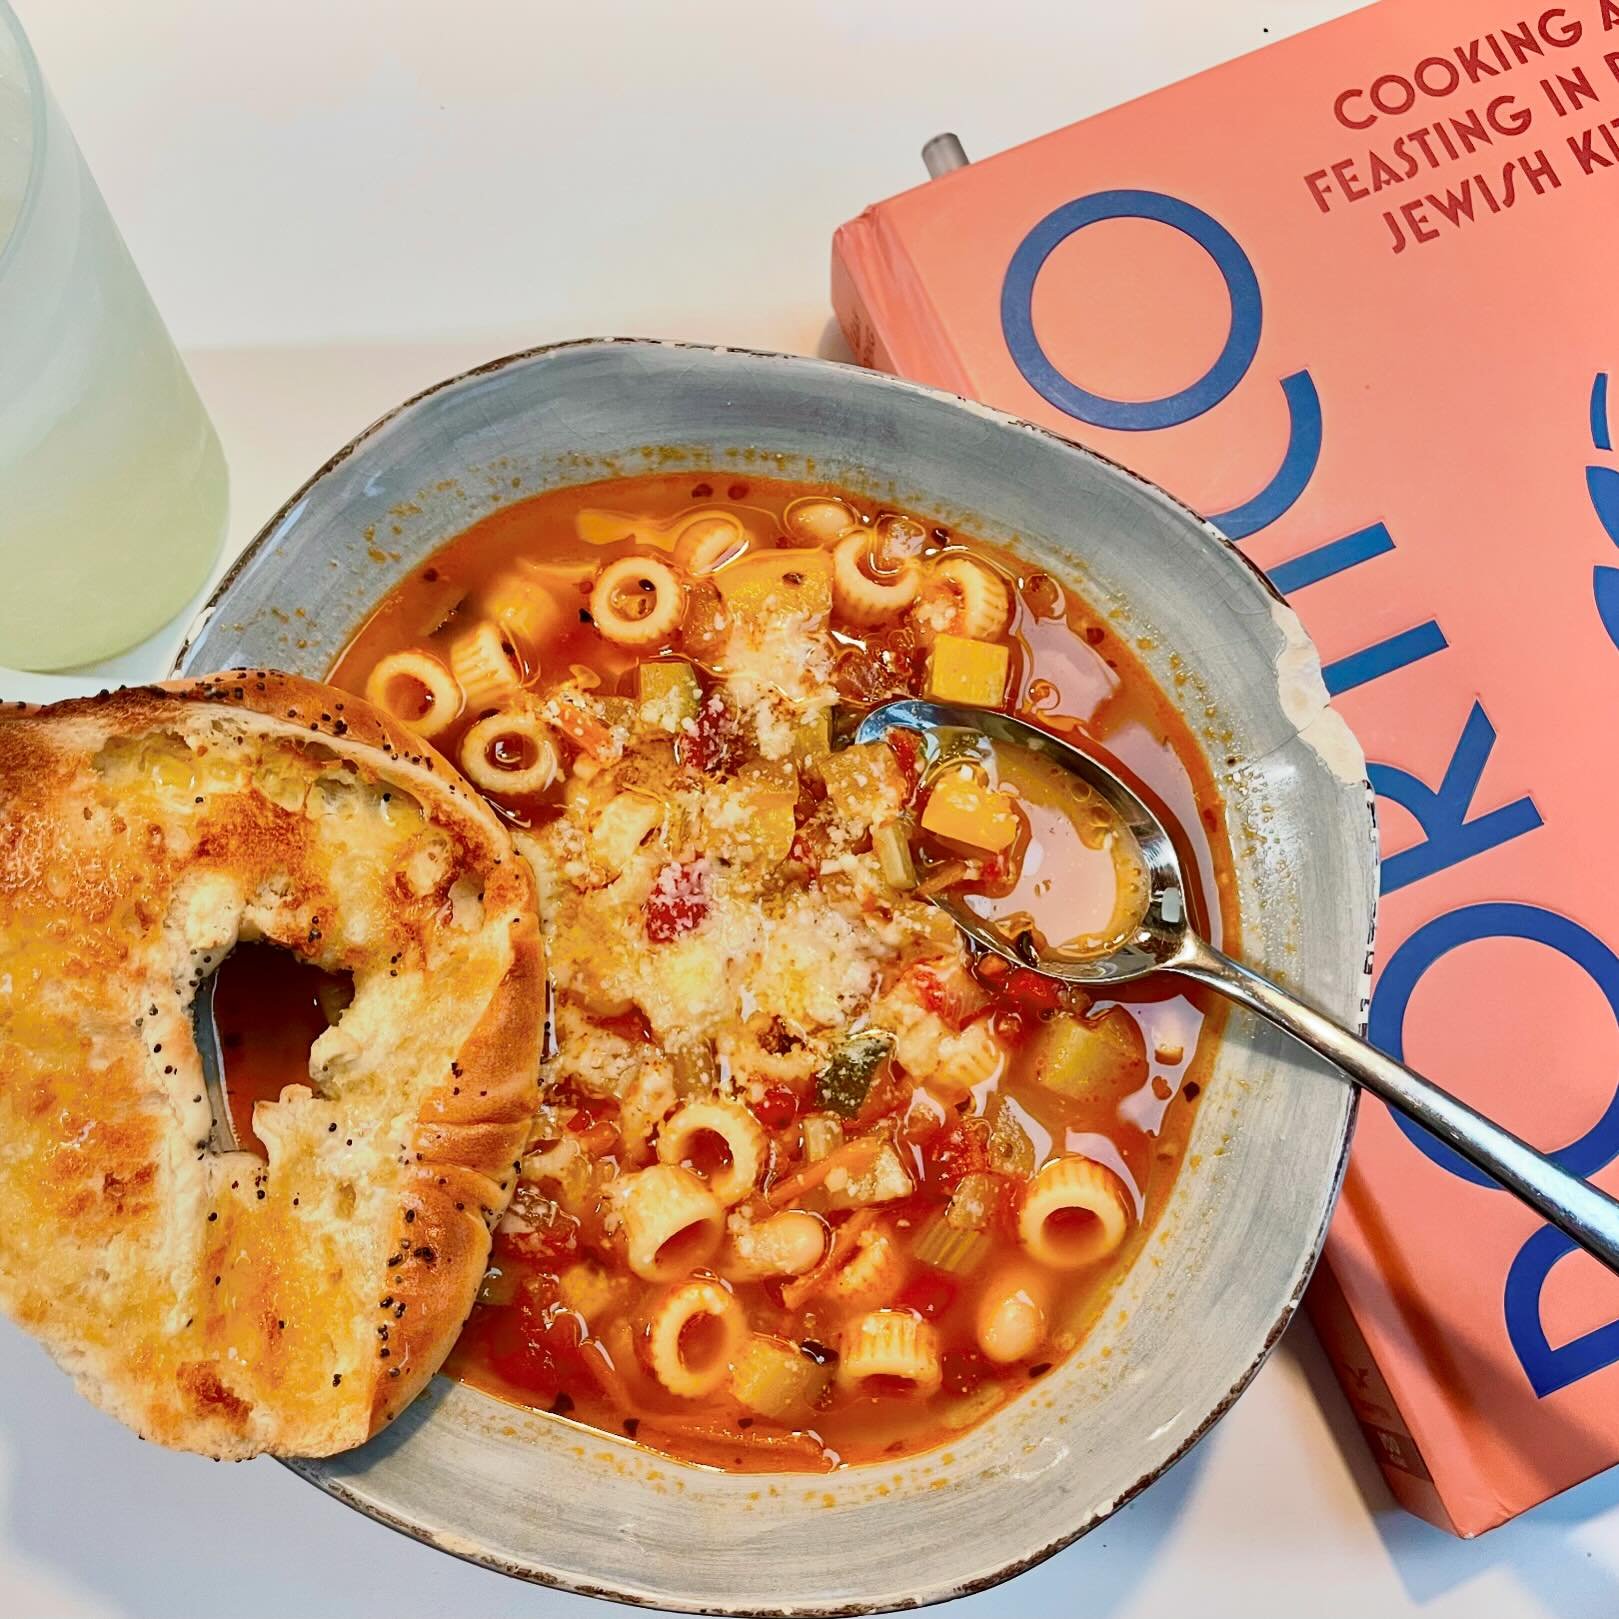 Some lounge time on a lazy rainy Sunday recently: homemade vegetable minestrone and a limonata, while perusing the @leah.koenig book about my beloved former home turf, the ghetto romano and its delicious food in #portico &mdash; great to reminisce ab